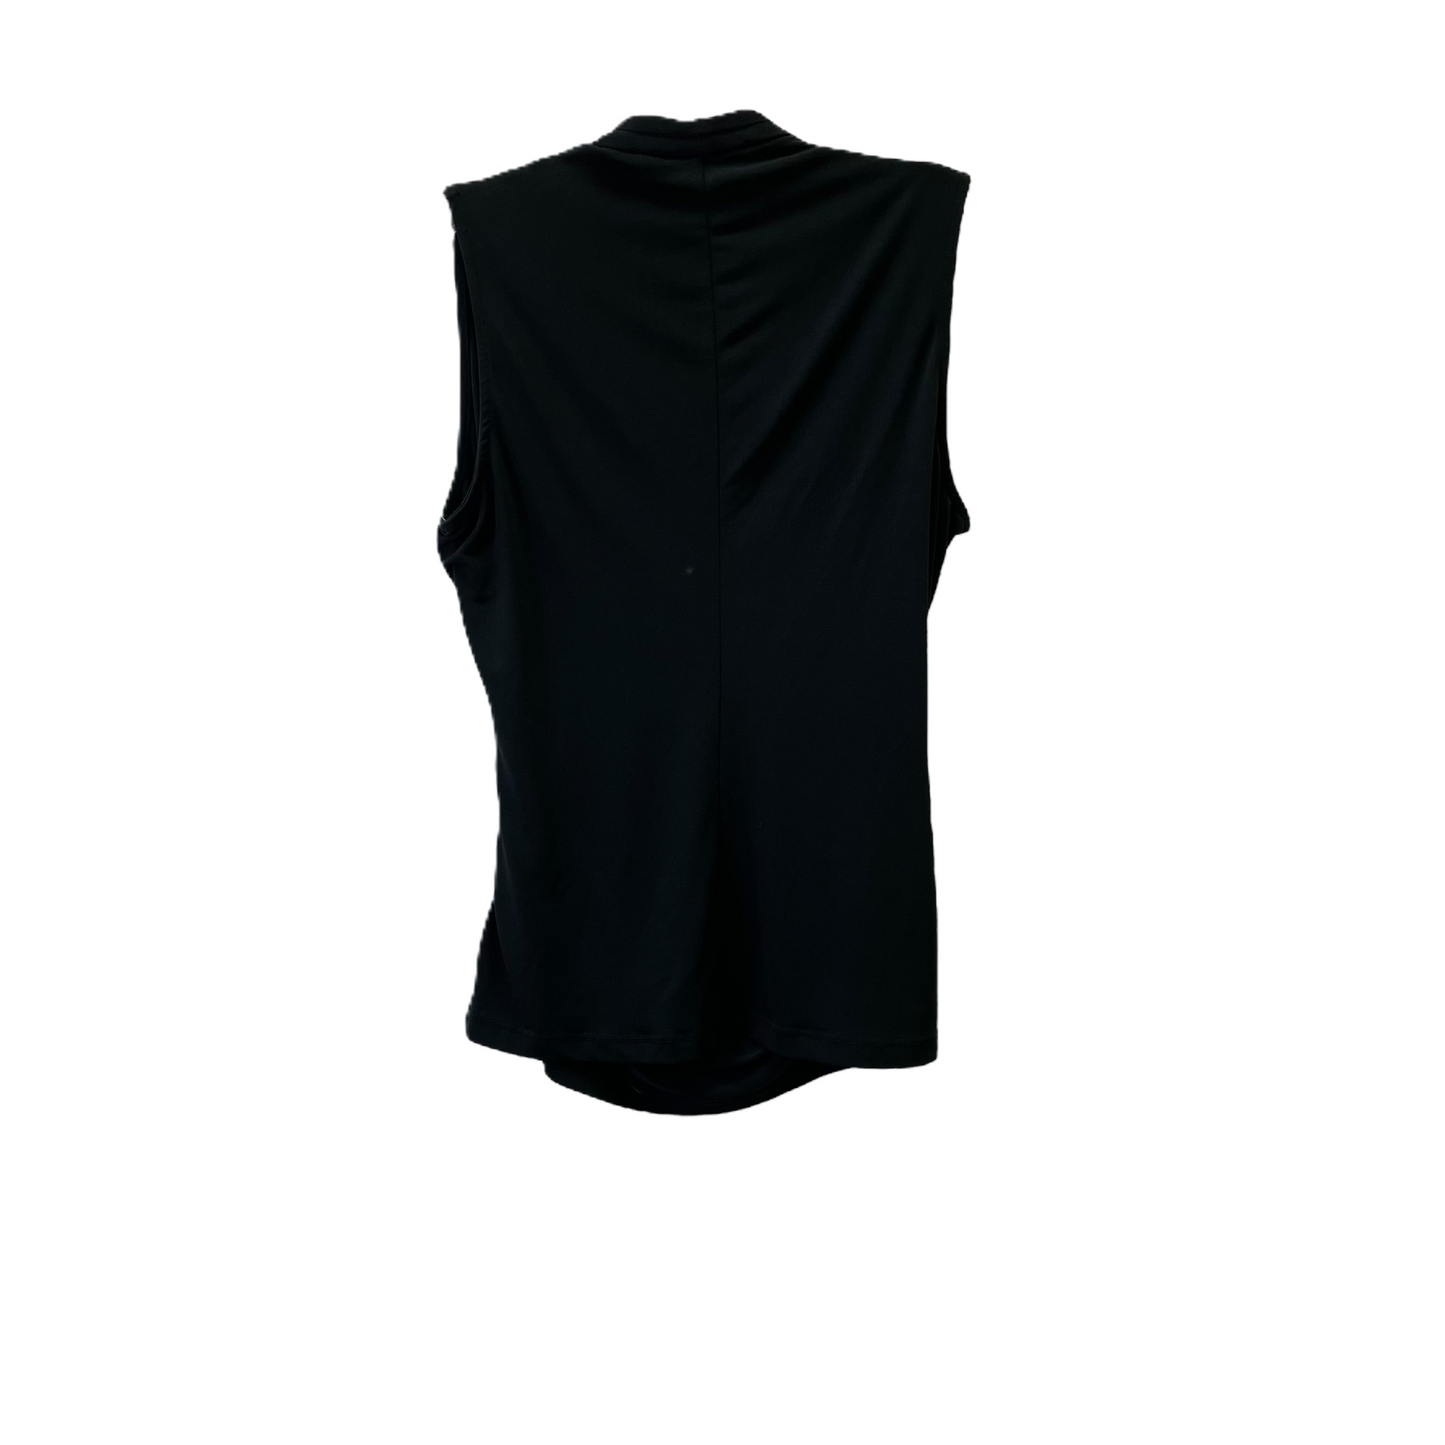 Black Top Short Sleeve By New York And Co, Size: S